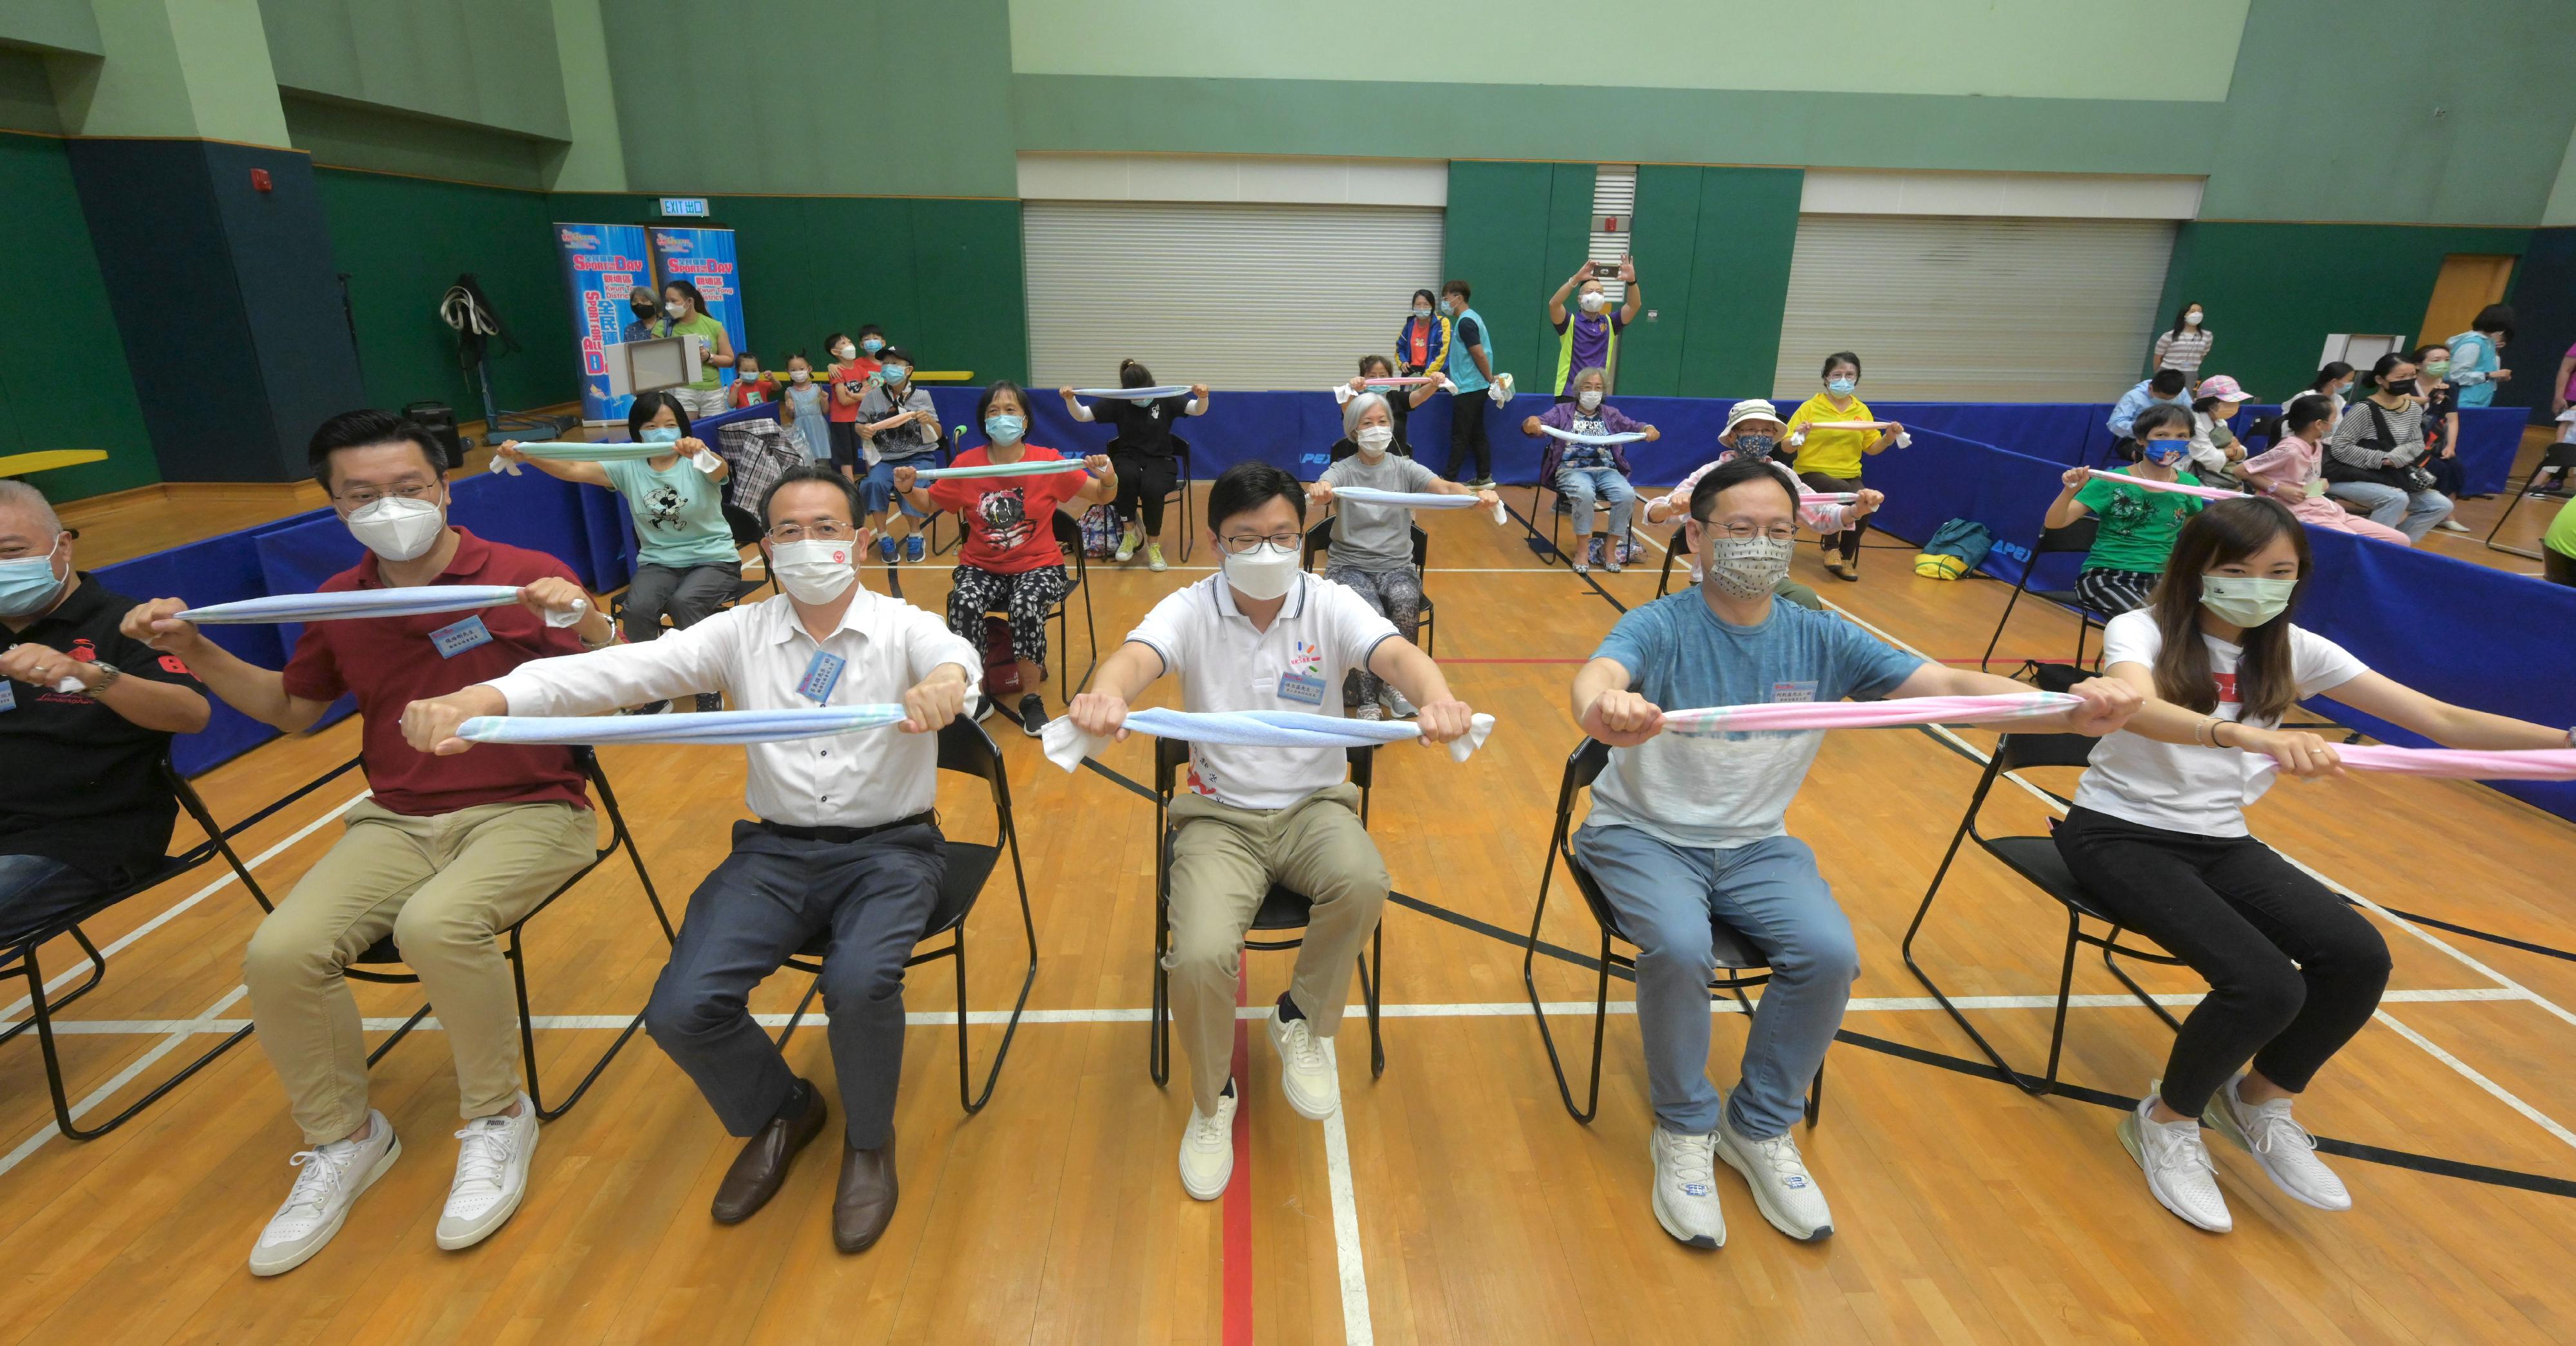 The Secretary for Labour and Welfare, Mr Chris Sun, joined the public for sports and recreation programmes at Lei Yue Mun Sports Centre this afternoon (August 7) as part of Sport For All Day 2022 organised by the Leisure and Cultural Services Department. Photo shows Mr Sun (front row, centre), accompanied by the Chairman of Kwun Tong District Council, Mr Wilson Or (front row, second right), and the Acting District Officer (Kwun Tong), Miss Cherry Sum (front row, first right), doing towel fitness exercises training physical fitness.